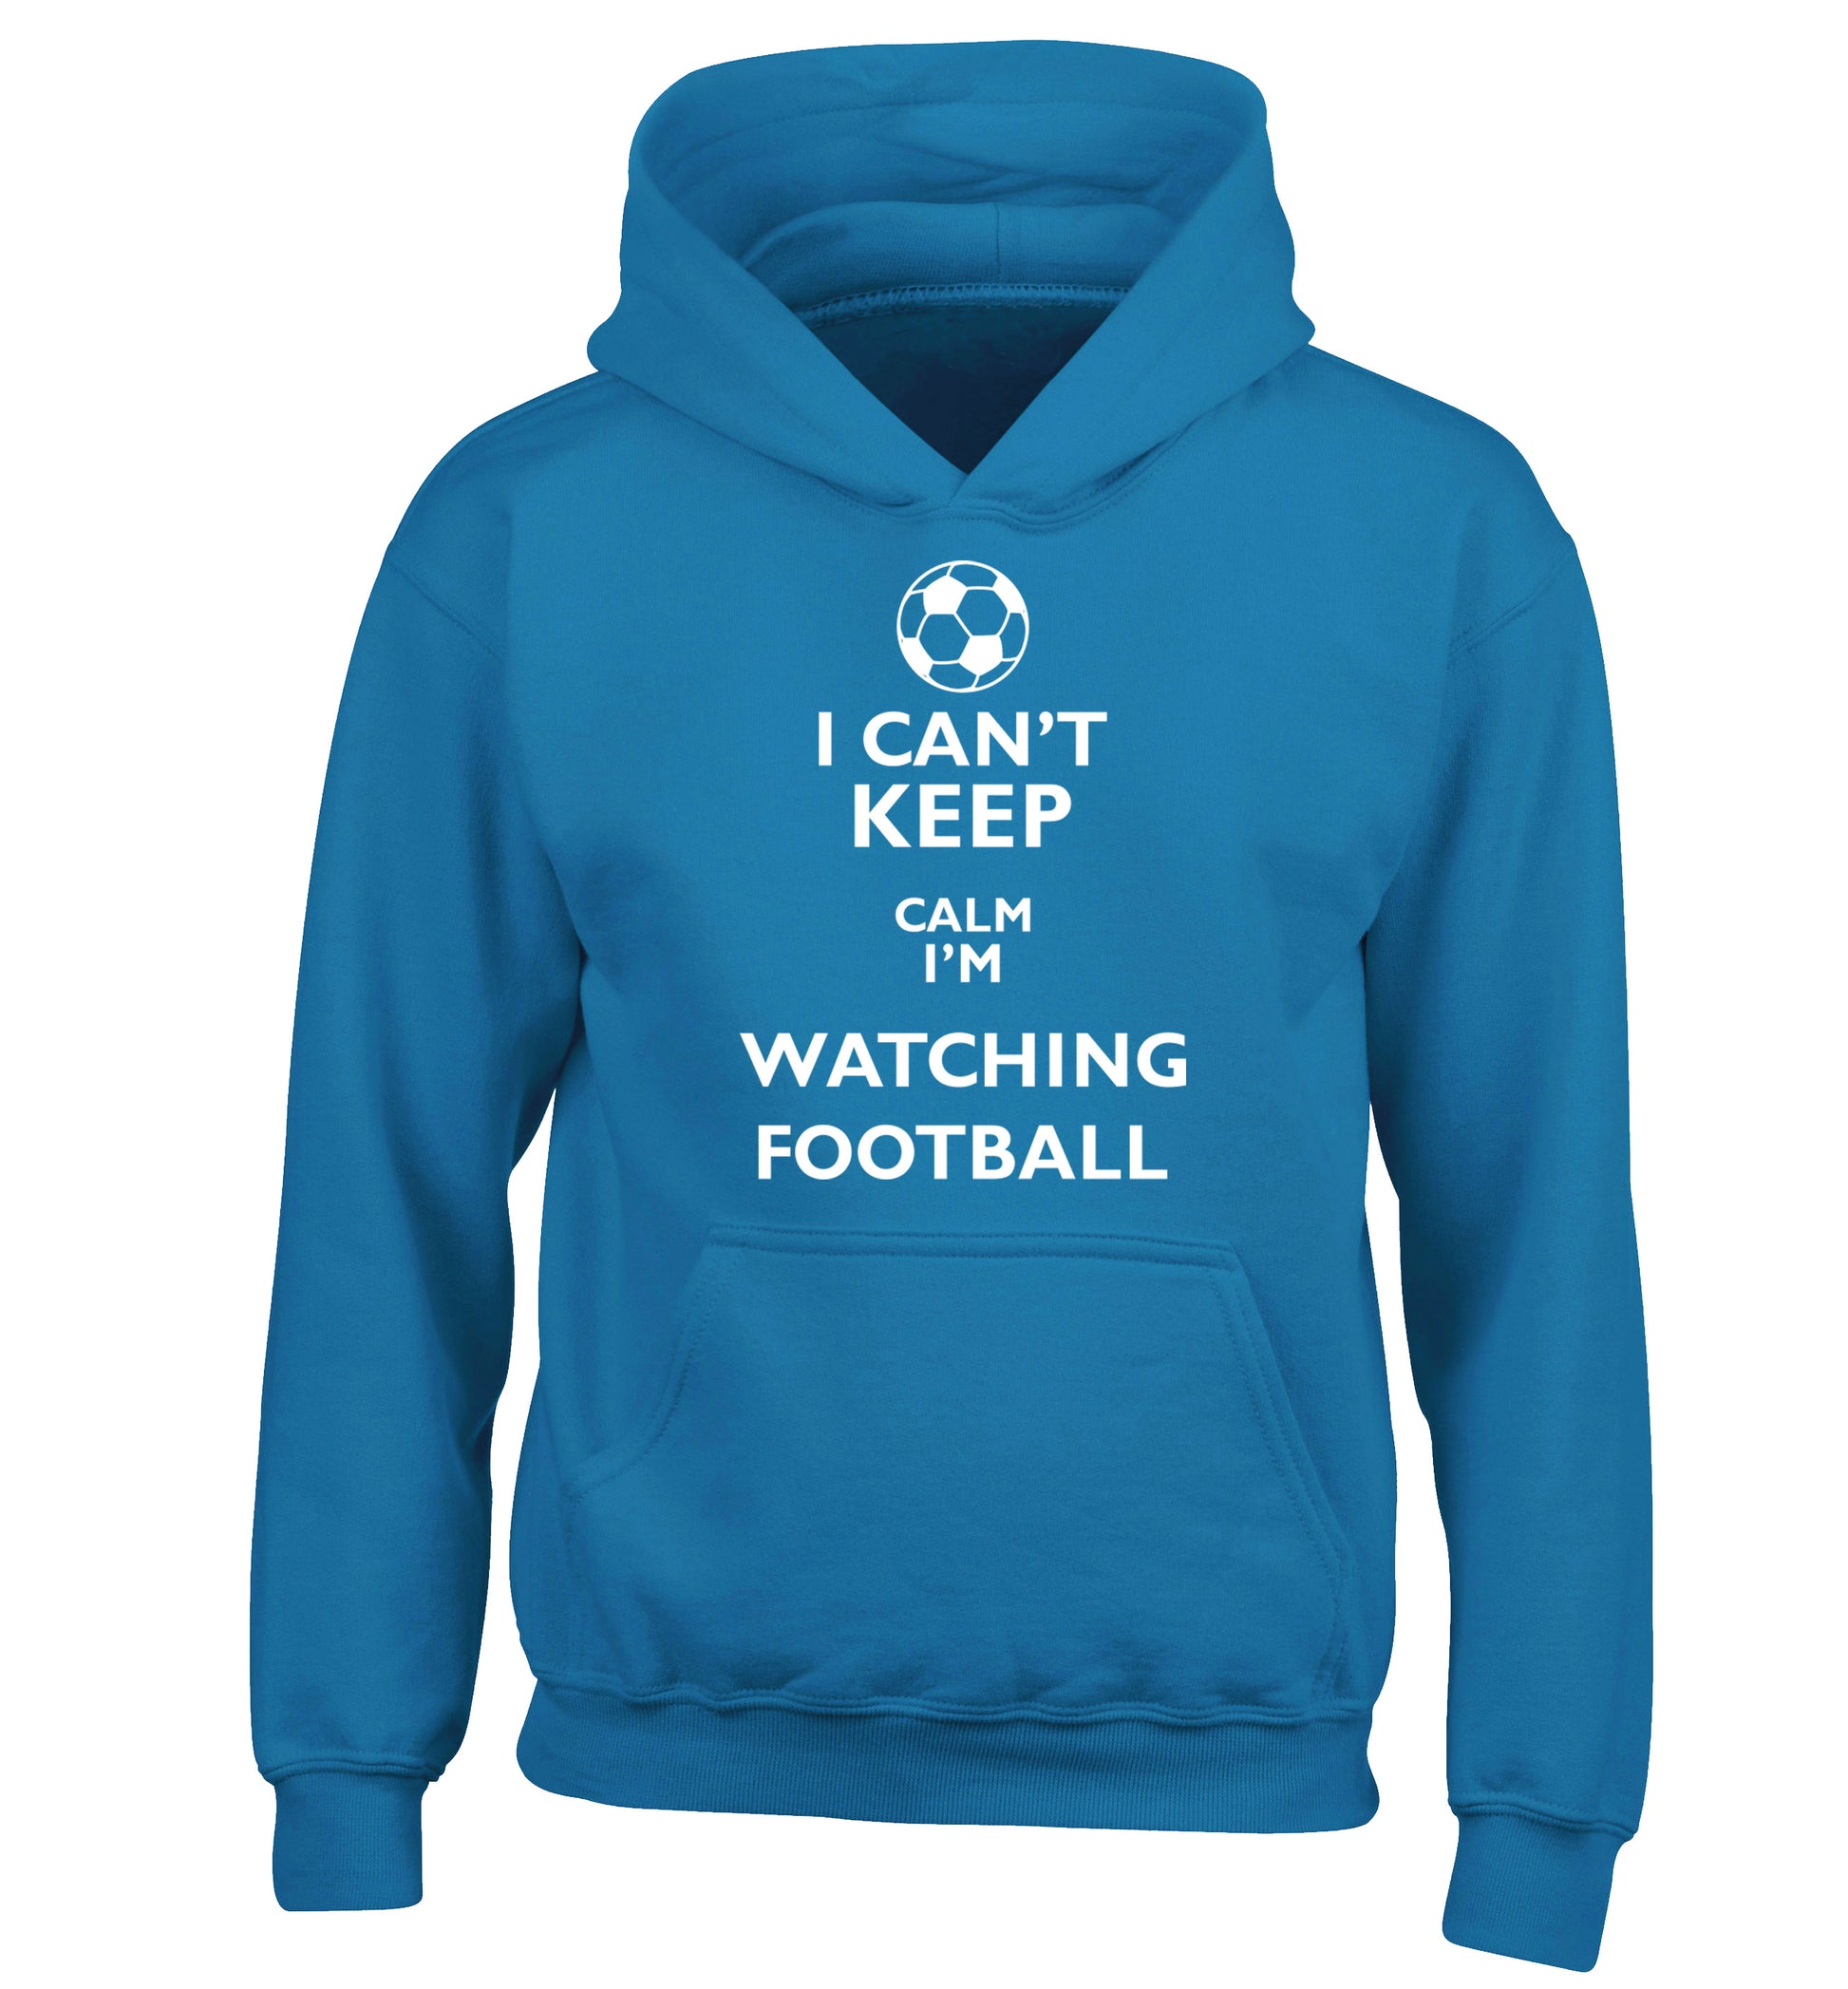 I can't keep calm I'm watching the football children's blue hoodie 12-14 Years